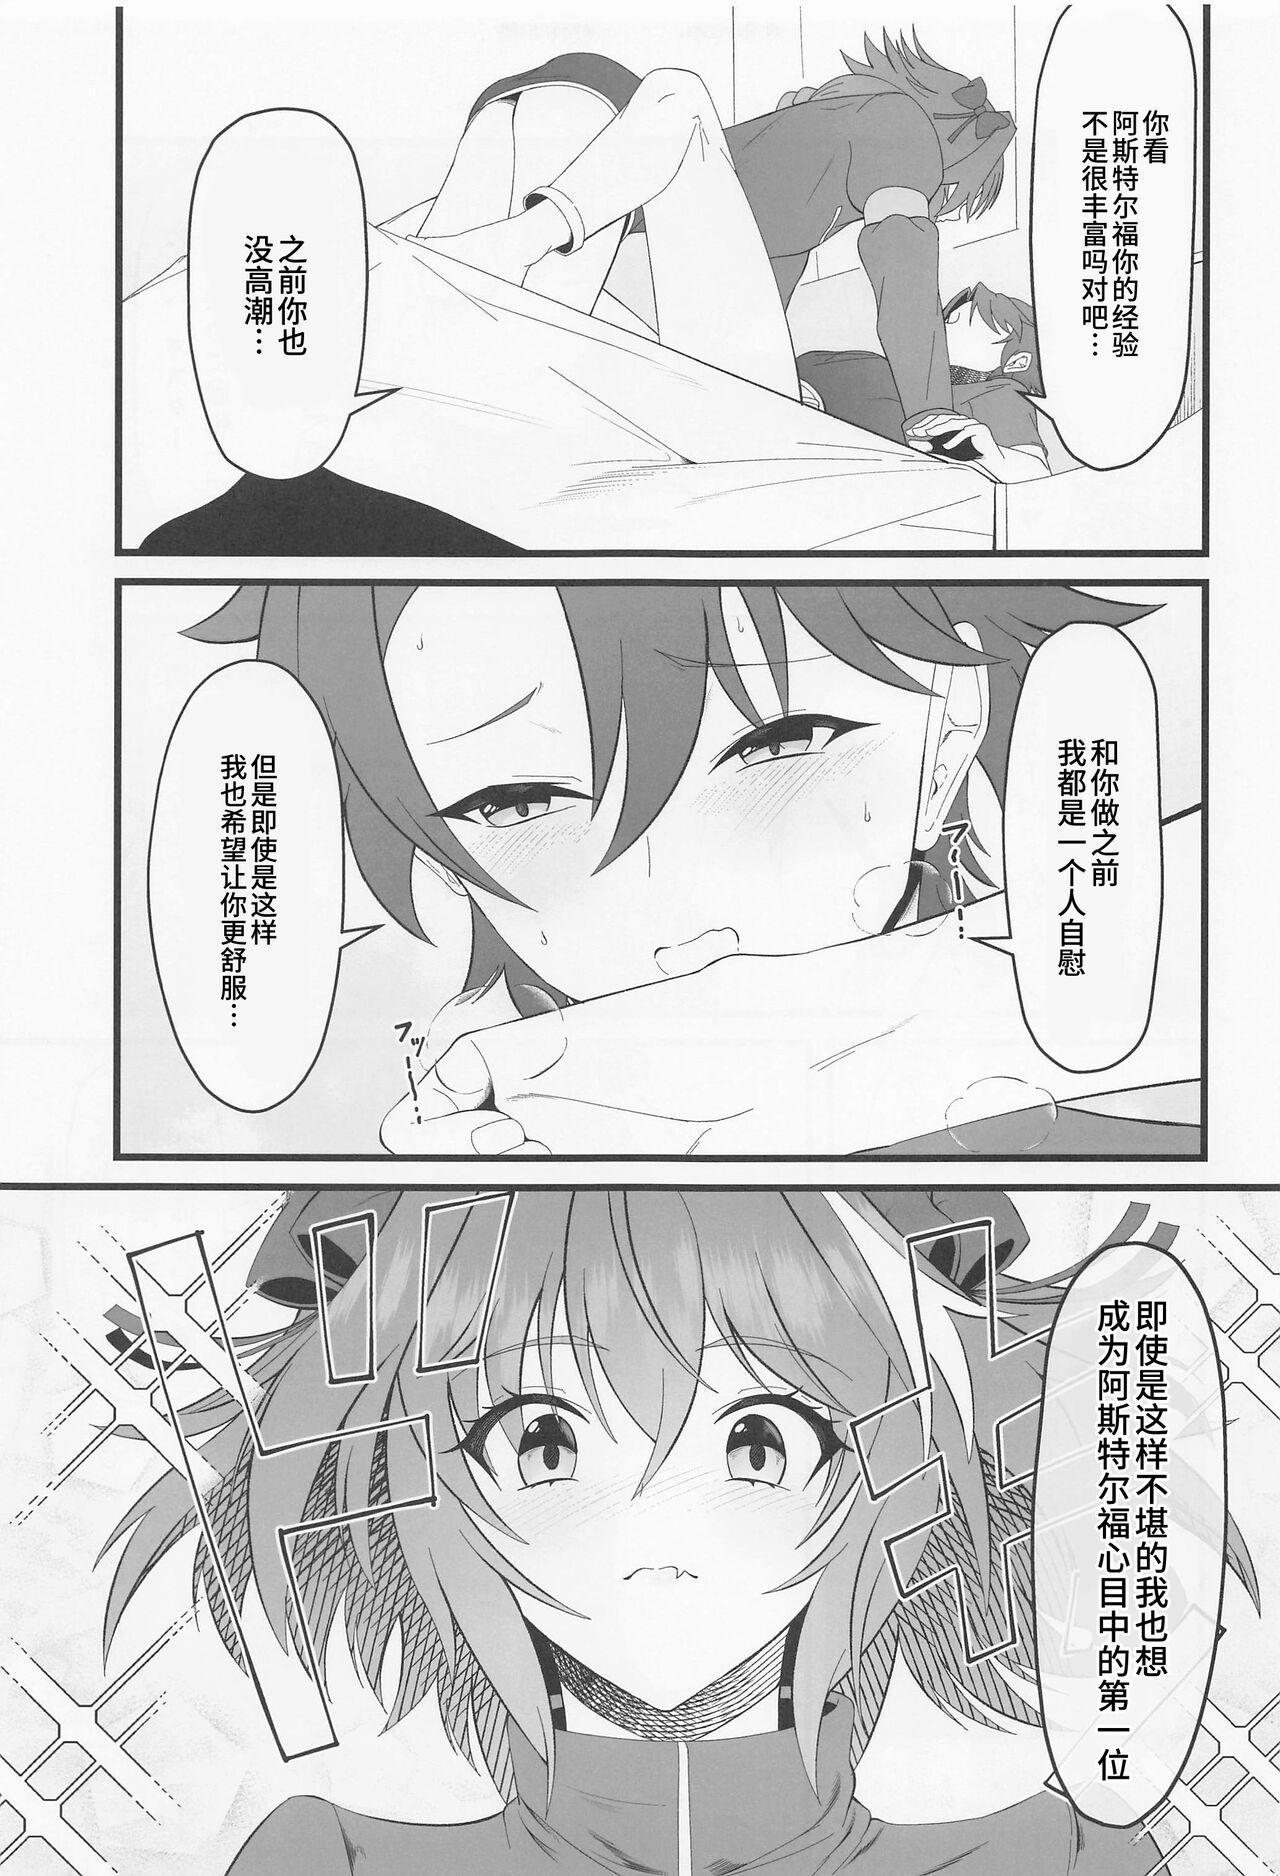 Clip Kimi no Ichiban ni Naritakute - I wanted to be your number one. - Fate grand order Large - Page 8